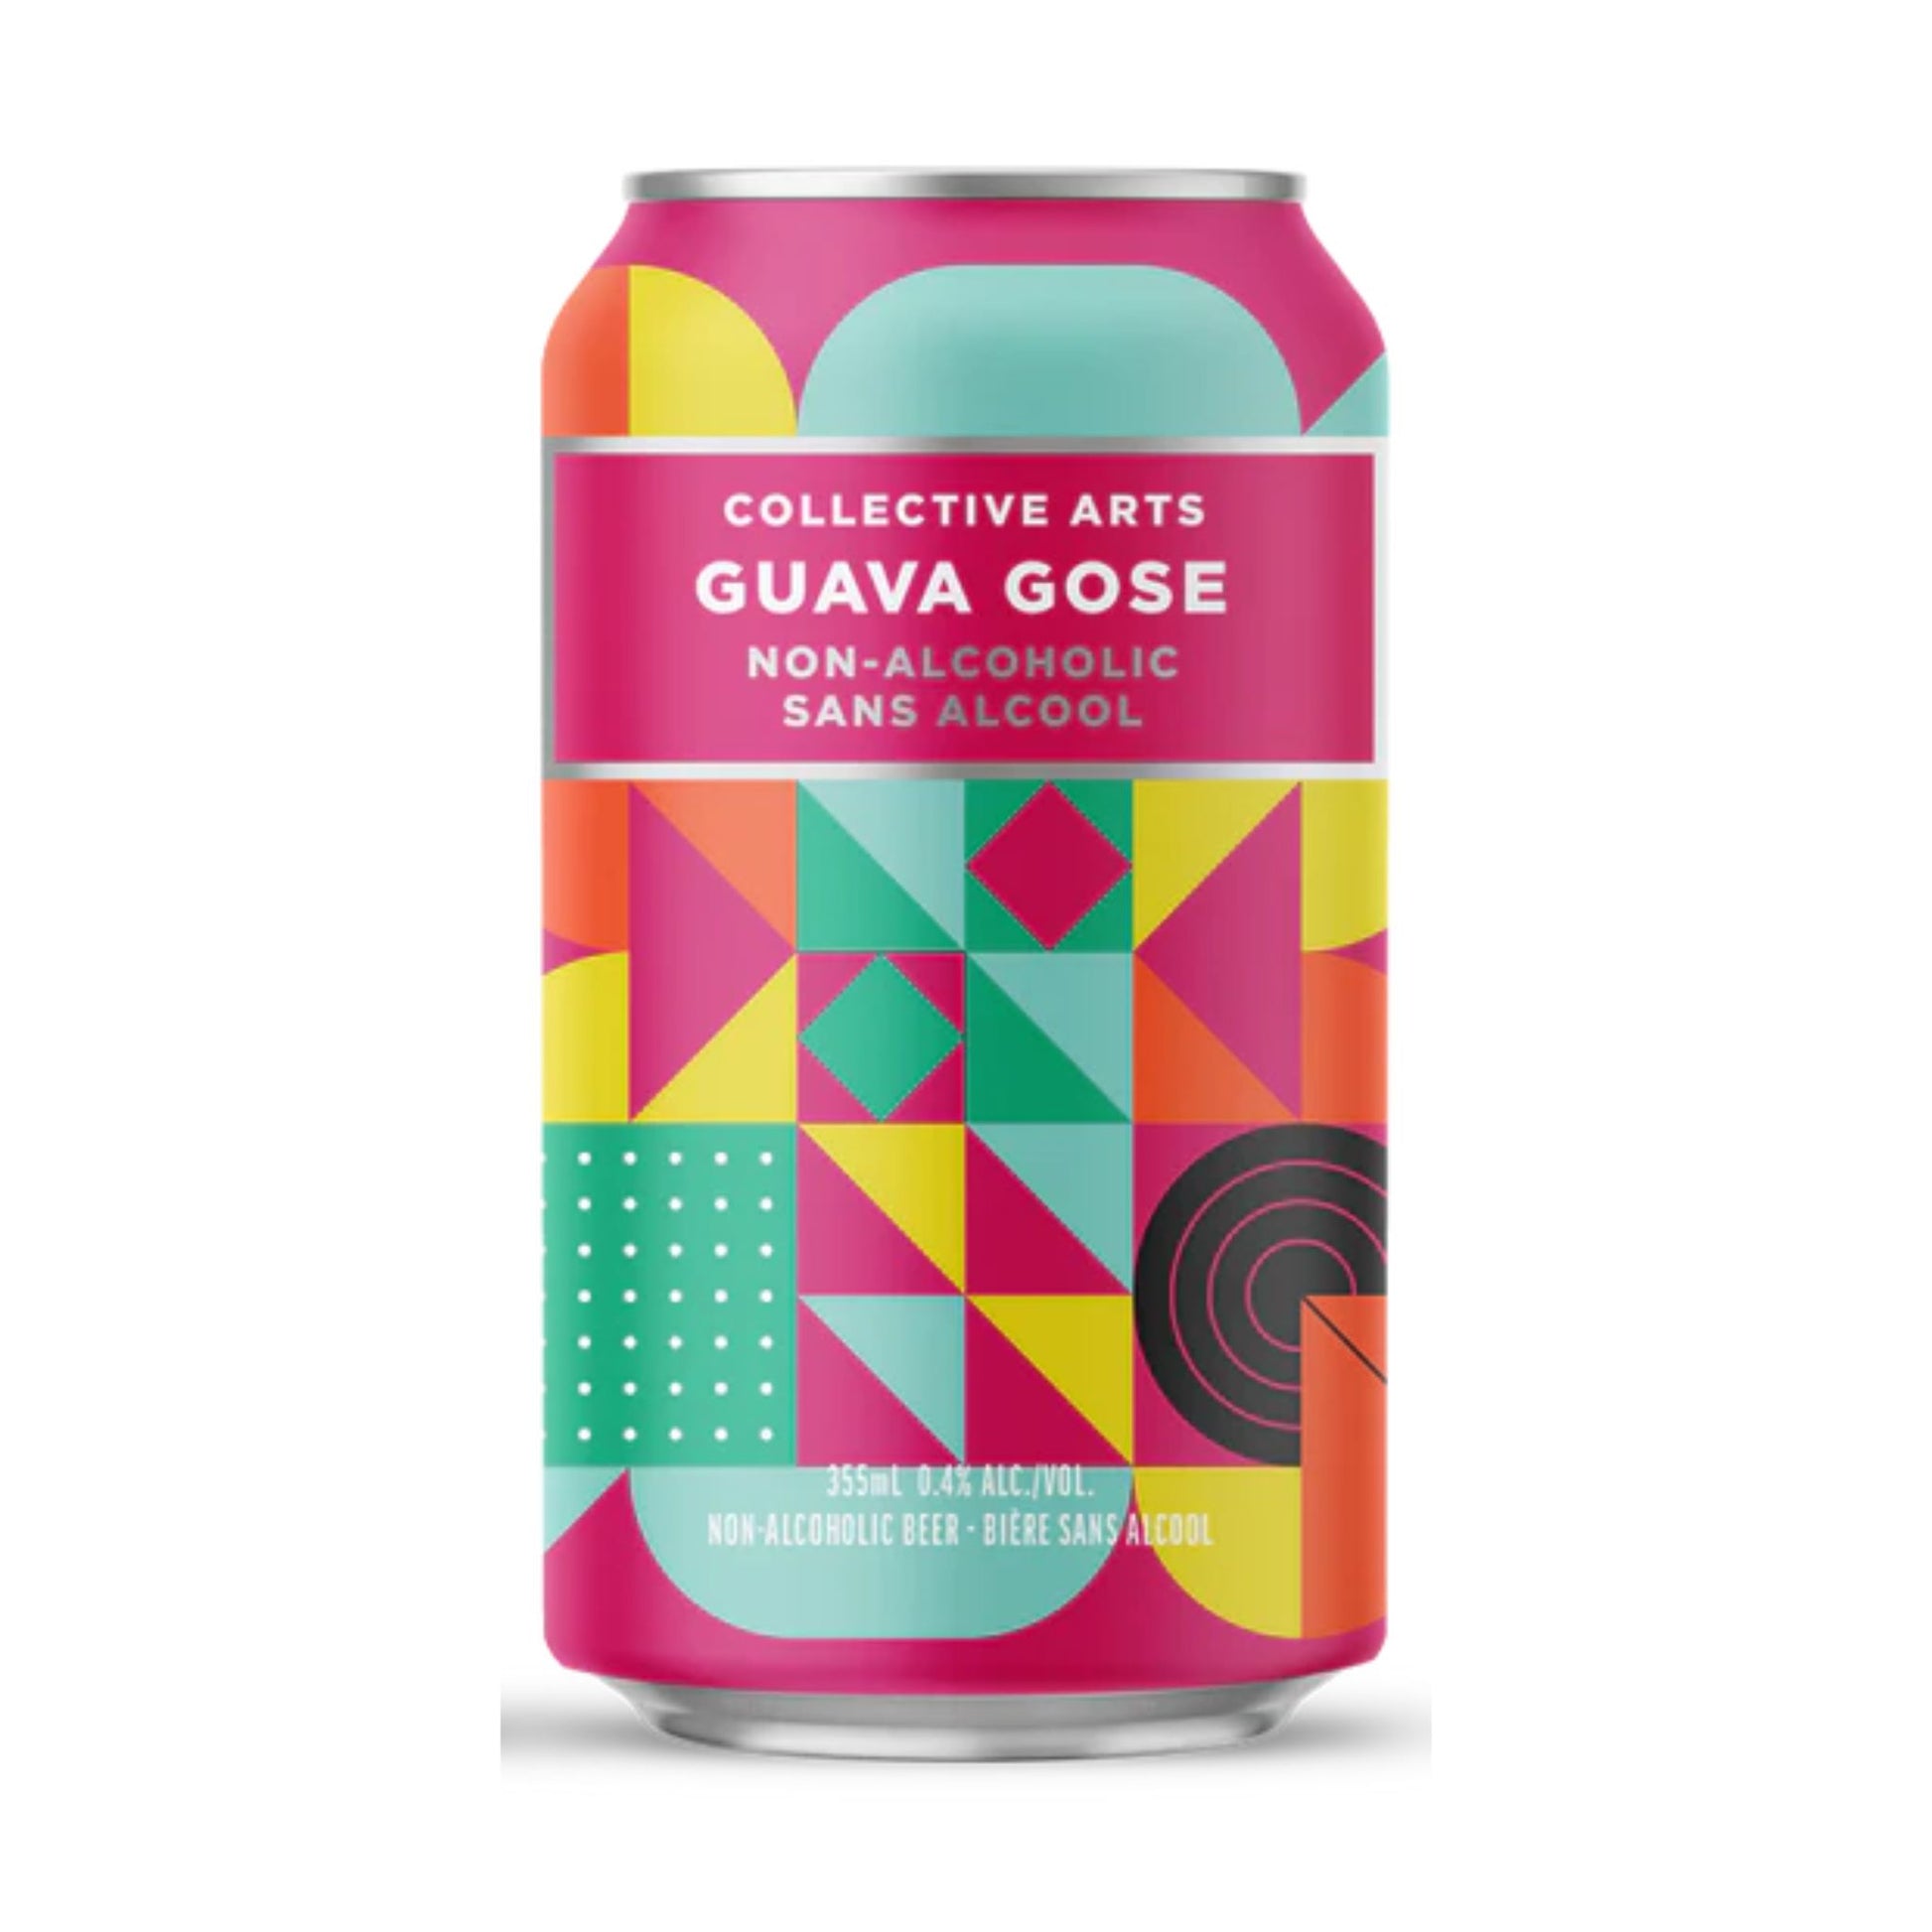 Collective Arts Non-Alcoholic Guava Gose is available at Knyota Non-Alcoholic Drinks.